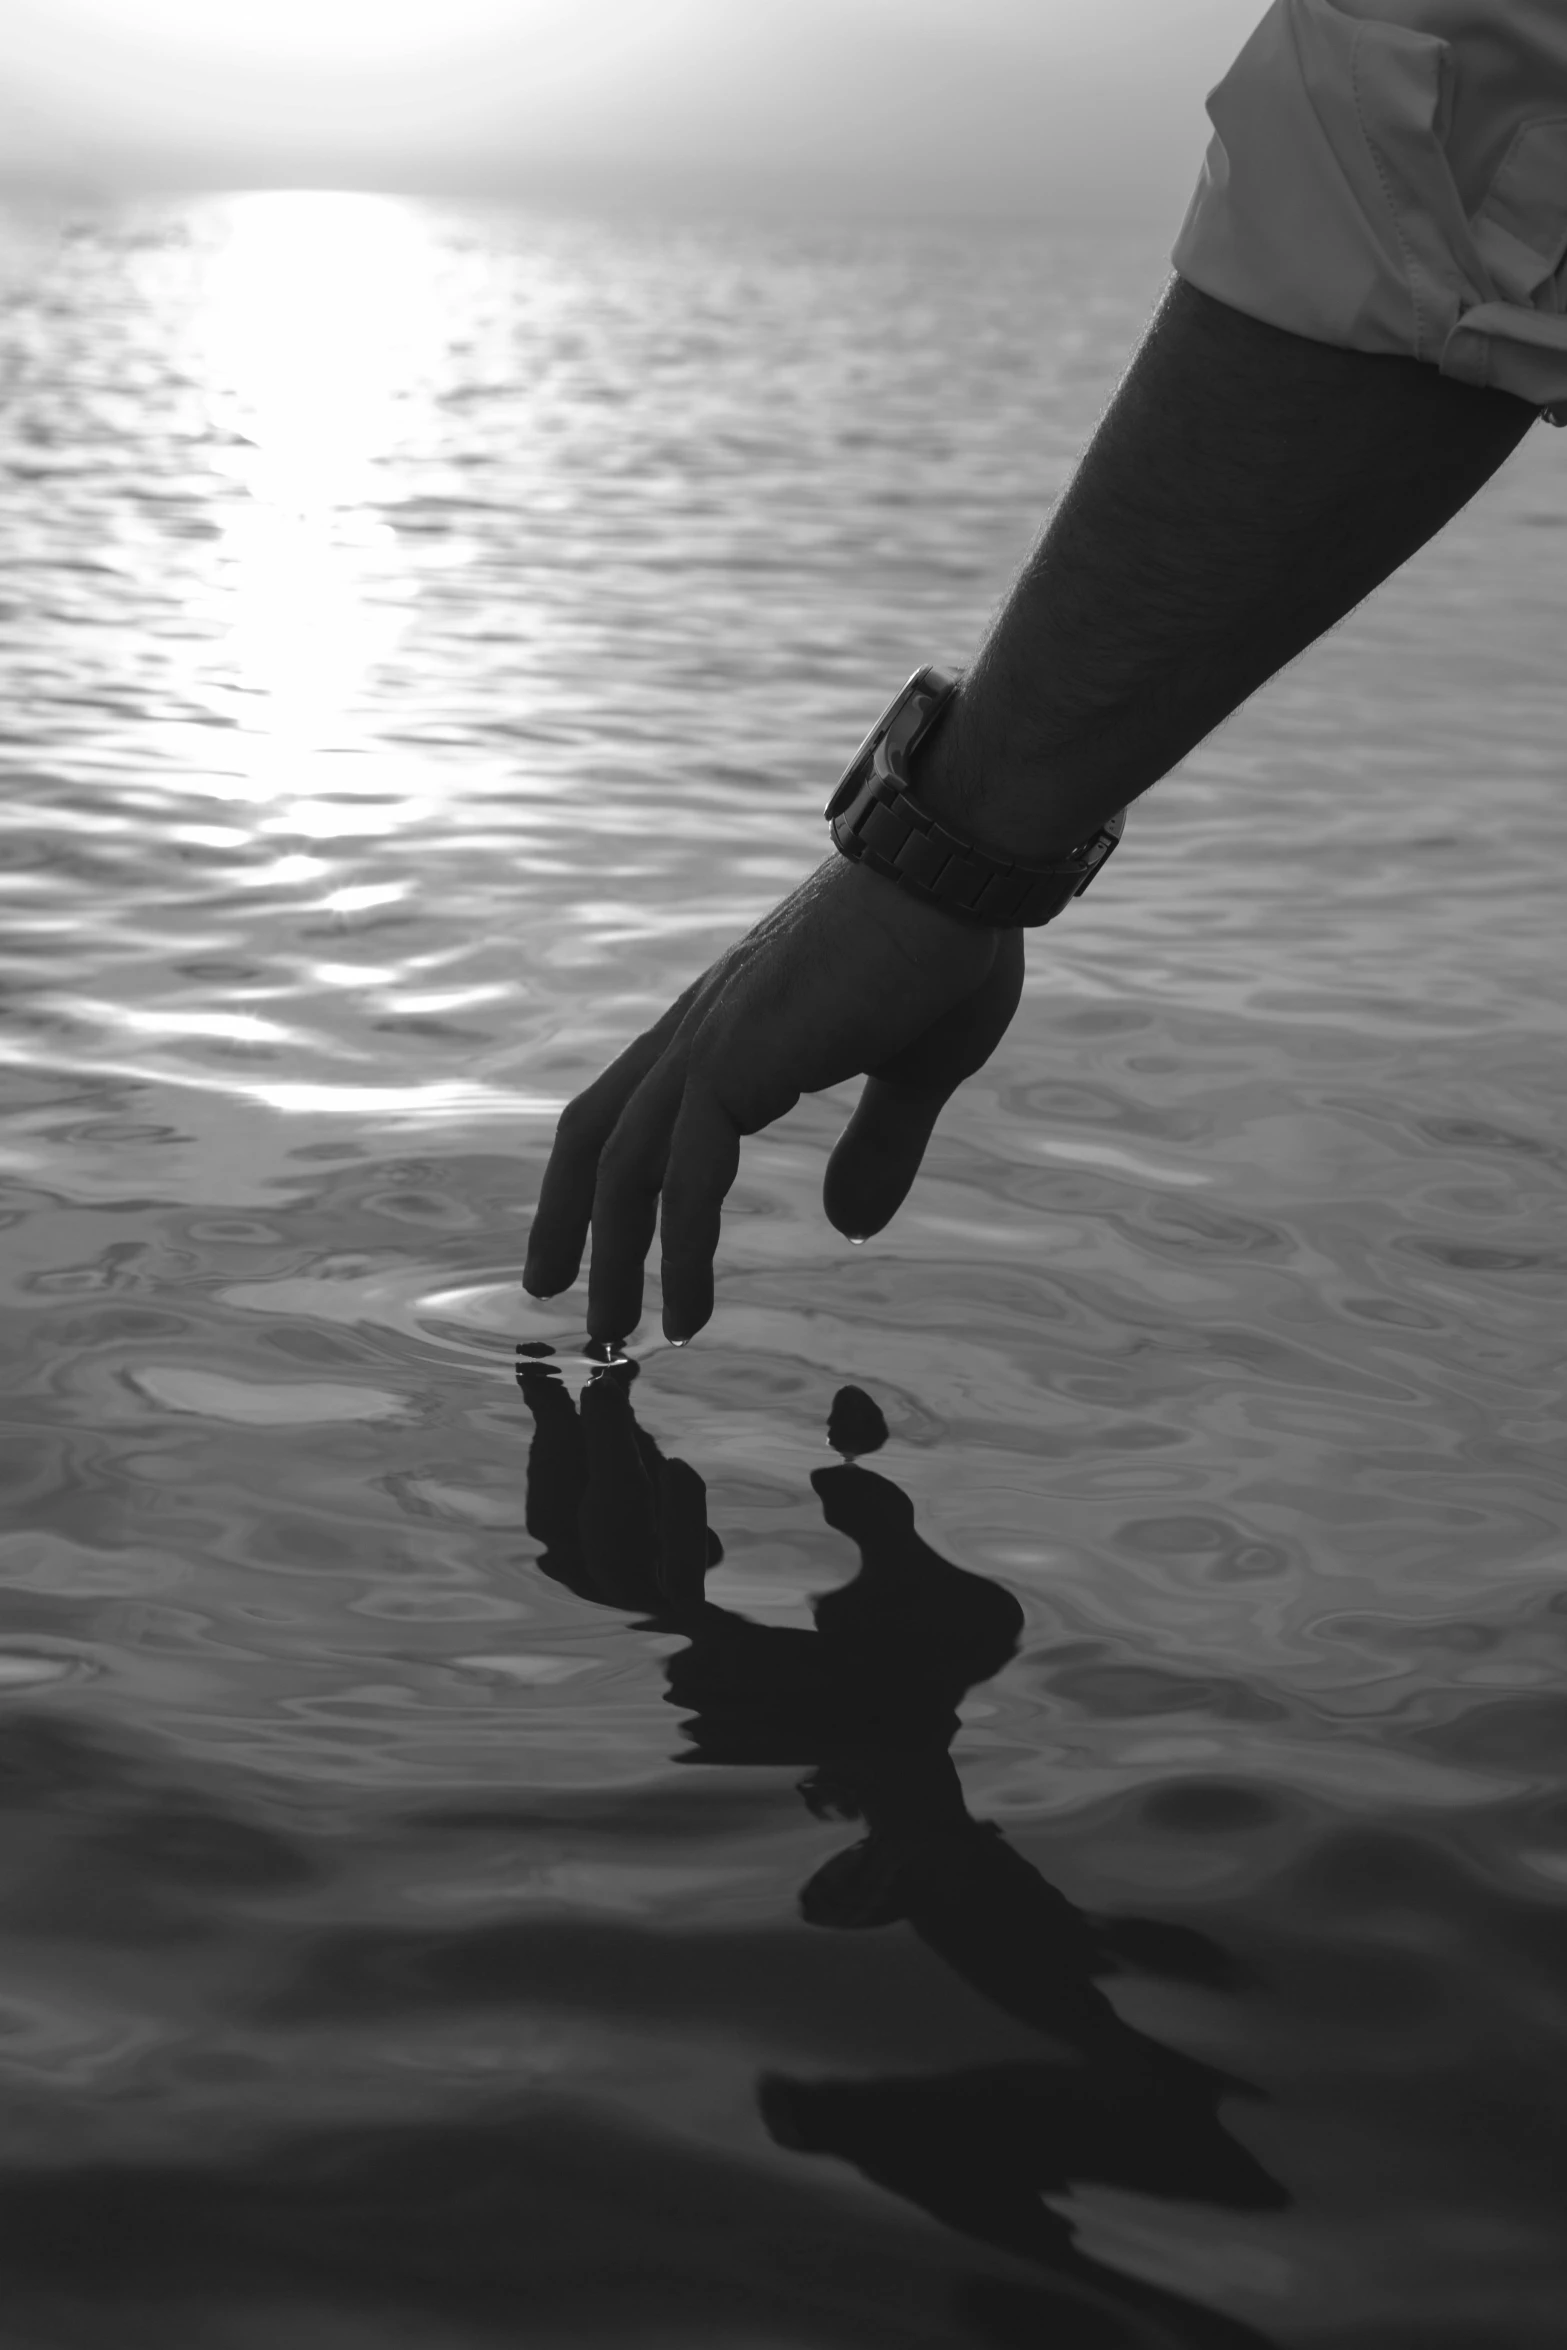 a person reaching for soing in the water